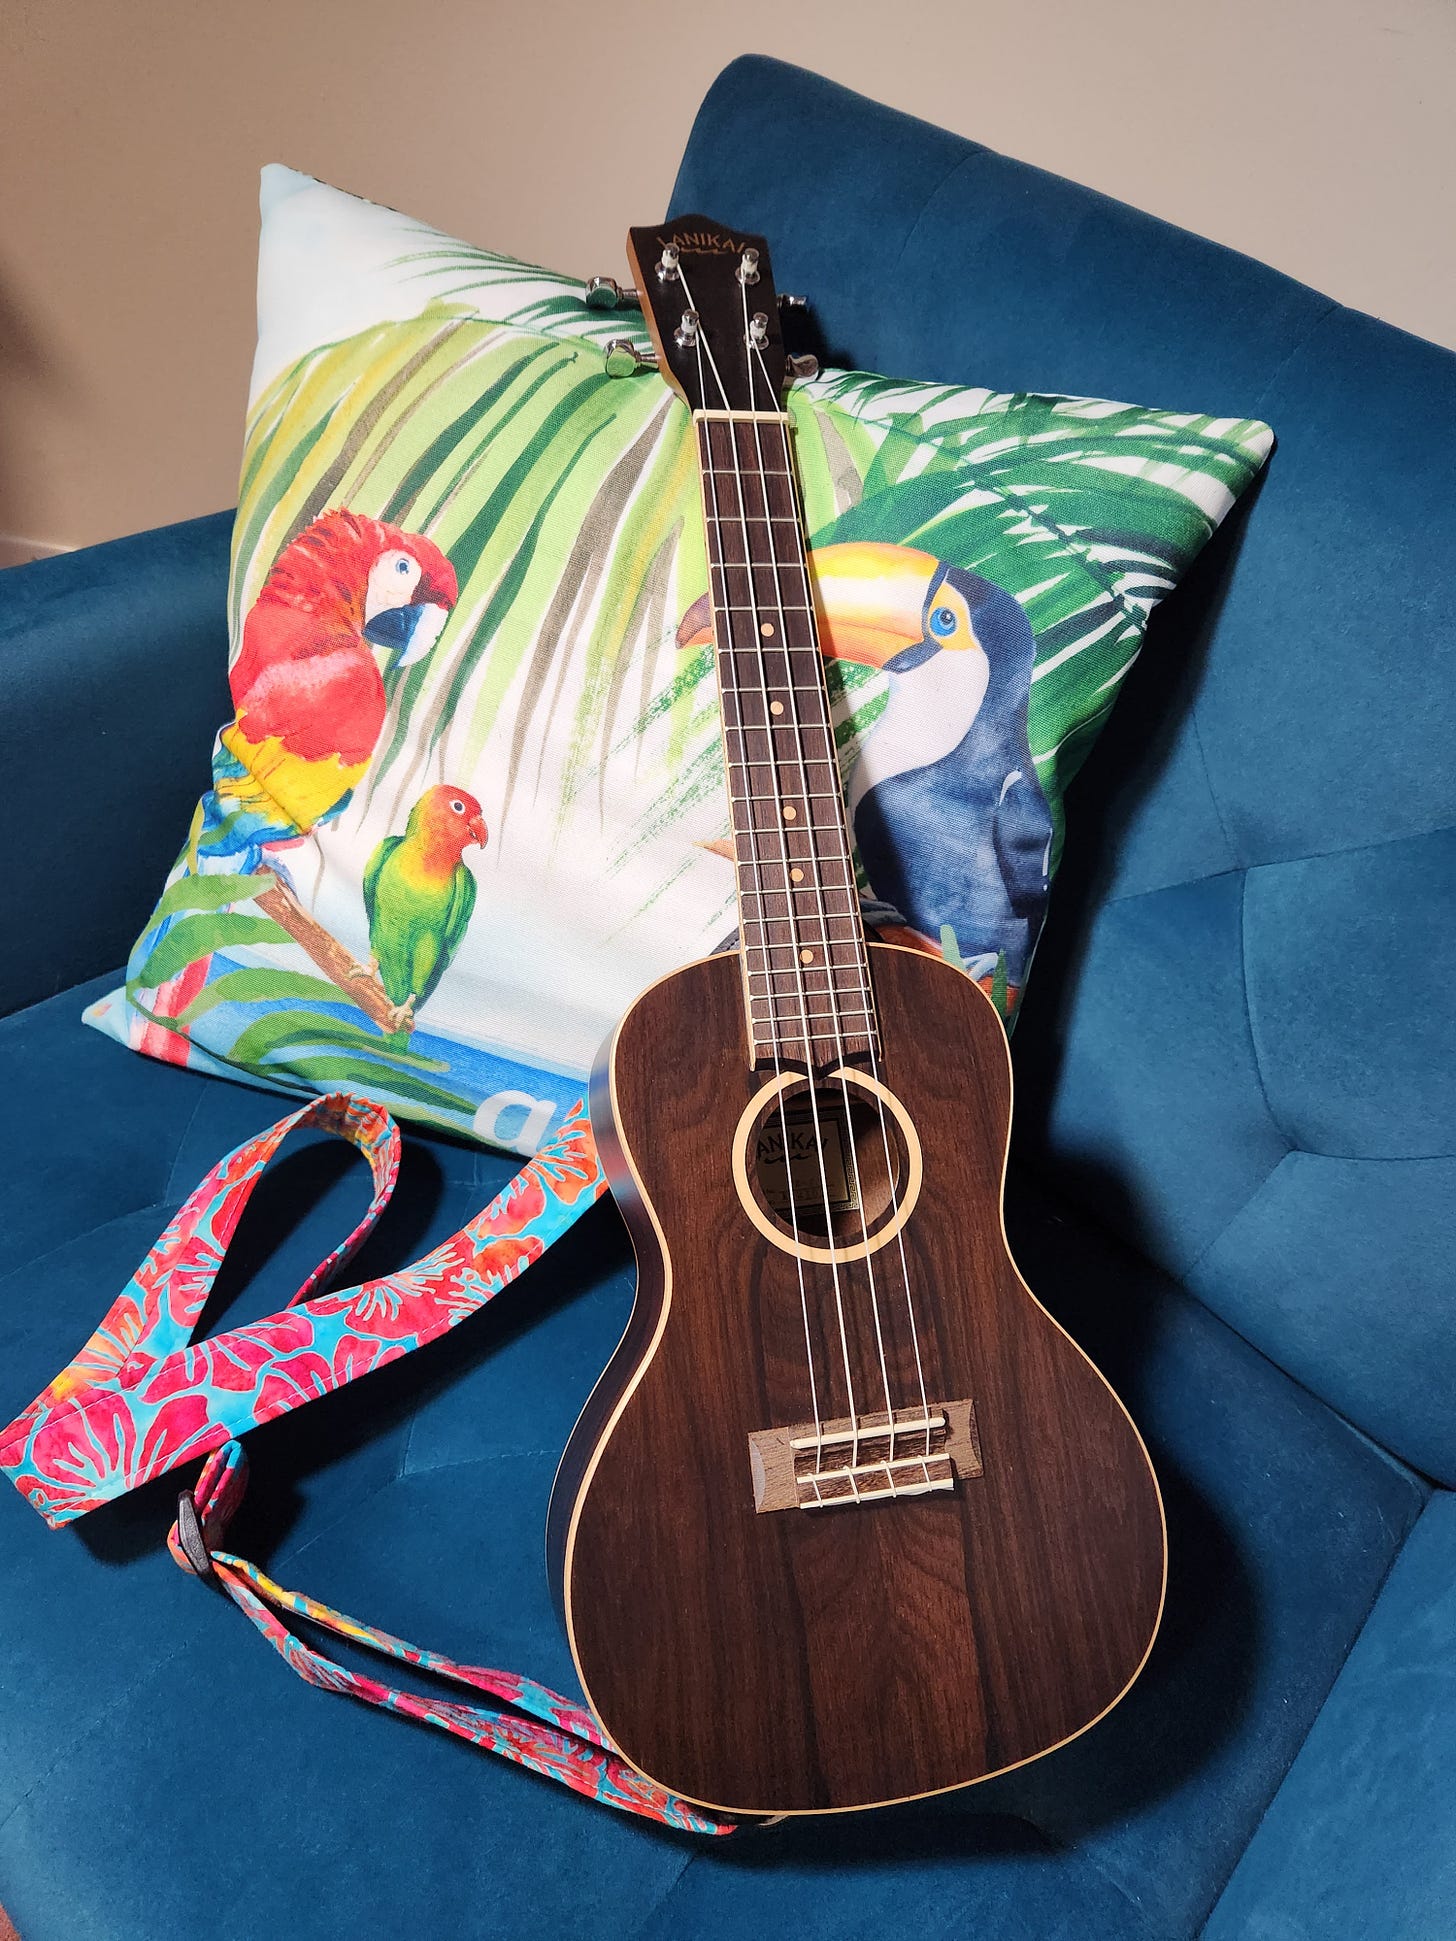 Ukulele on a teal chair with a colorful pillow